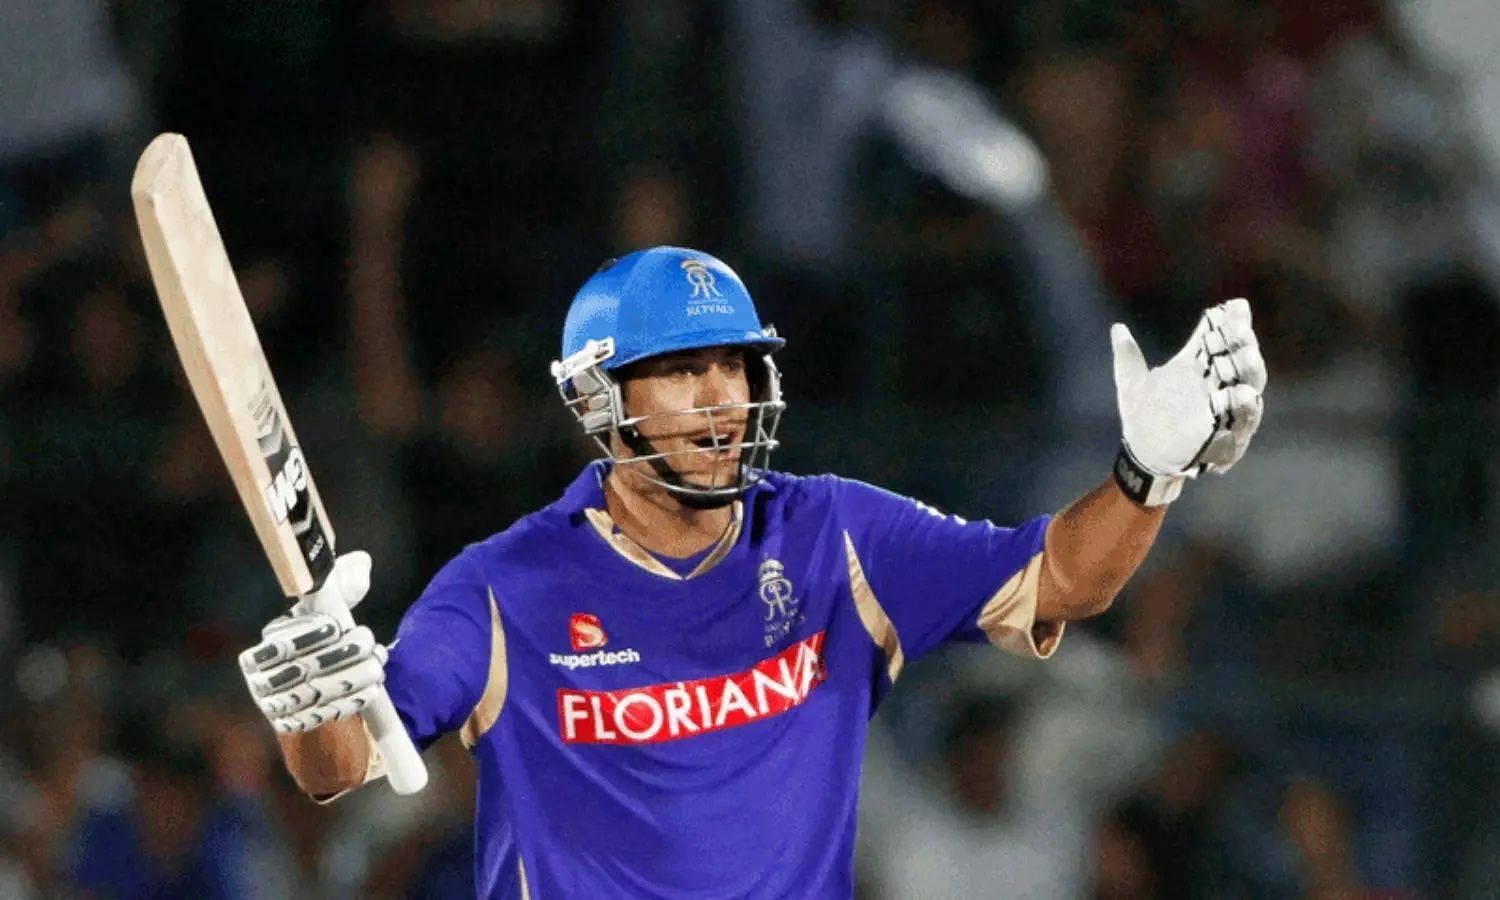 Ross Taylor during his stint for for Rajasthan Royals in 2011. Pic Credit: Emirates24/7